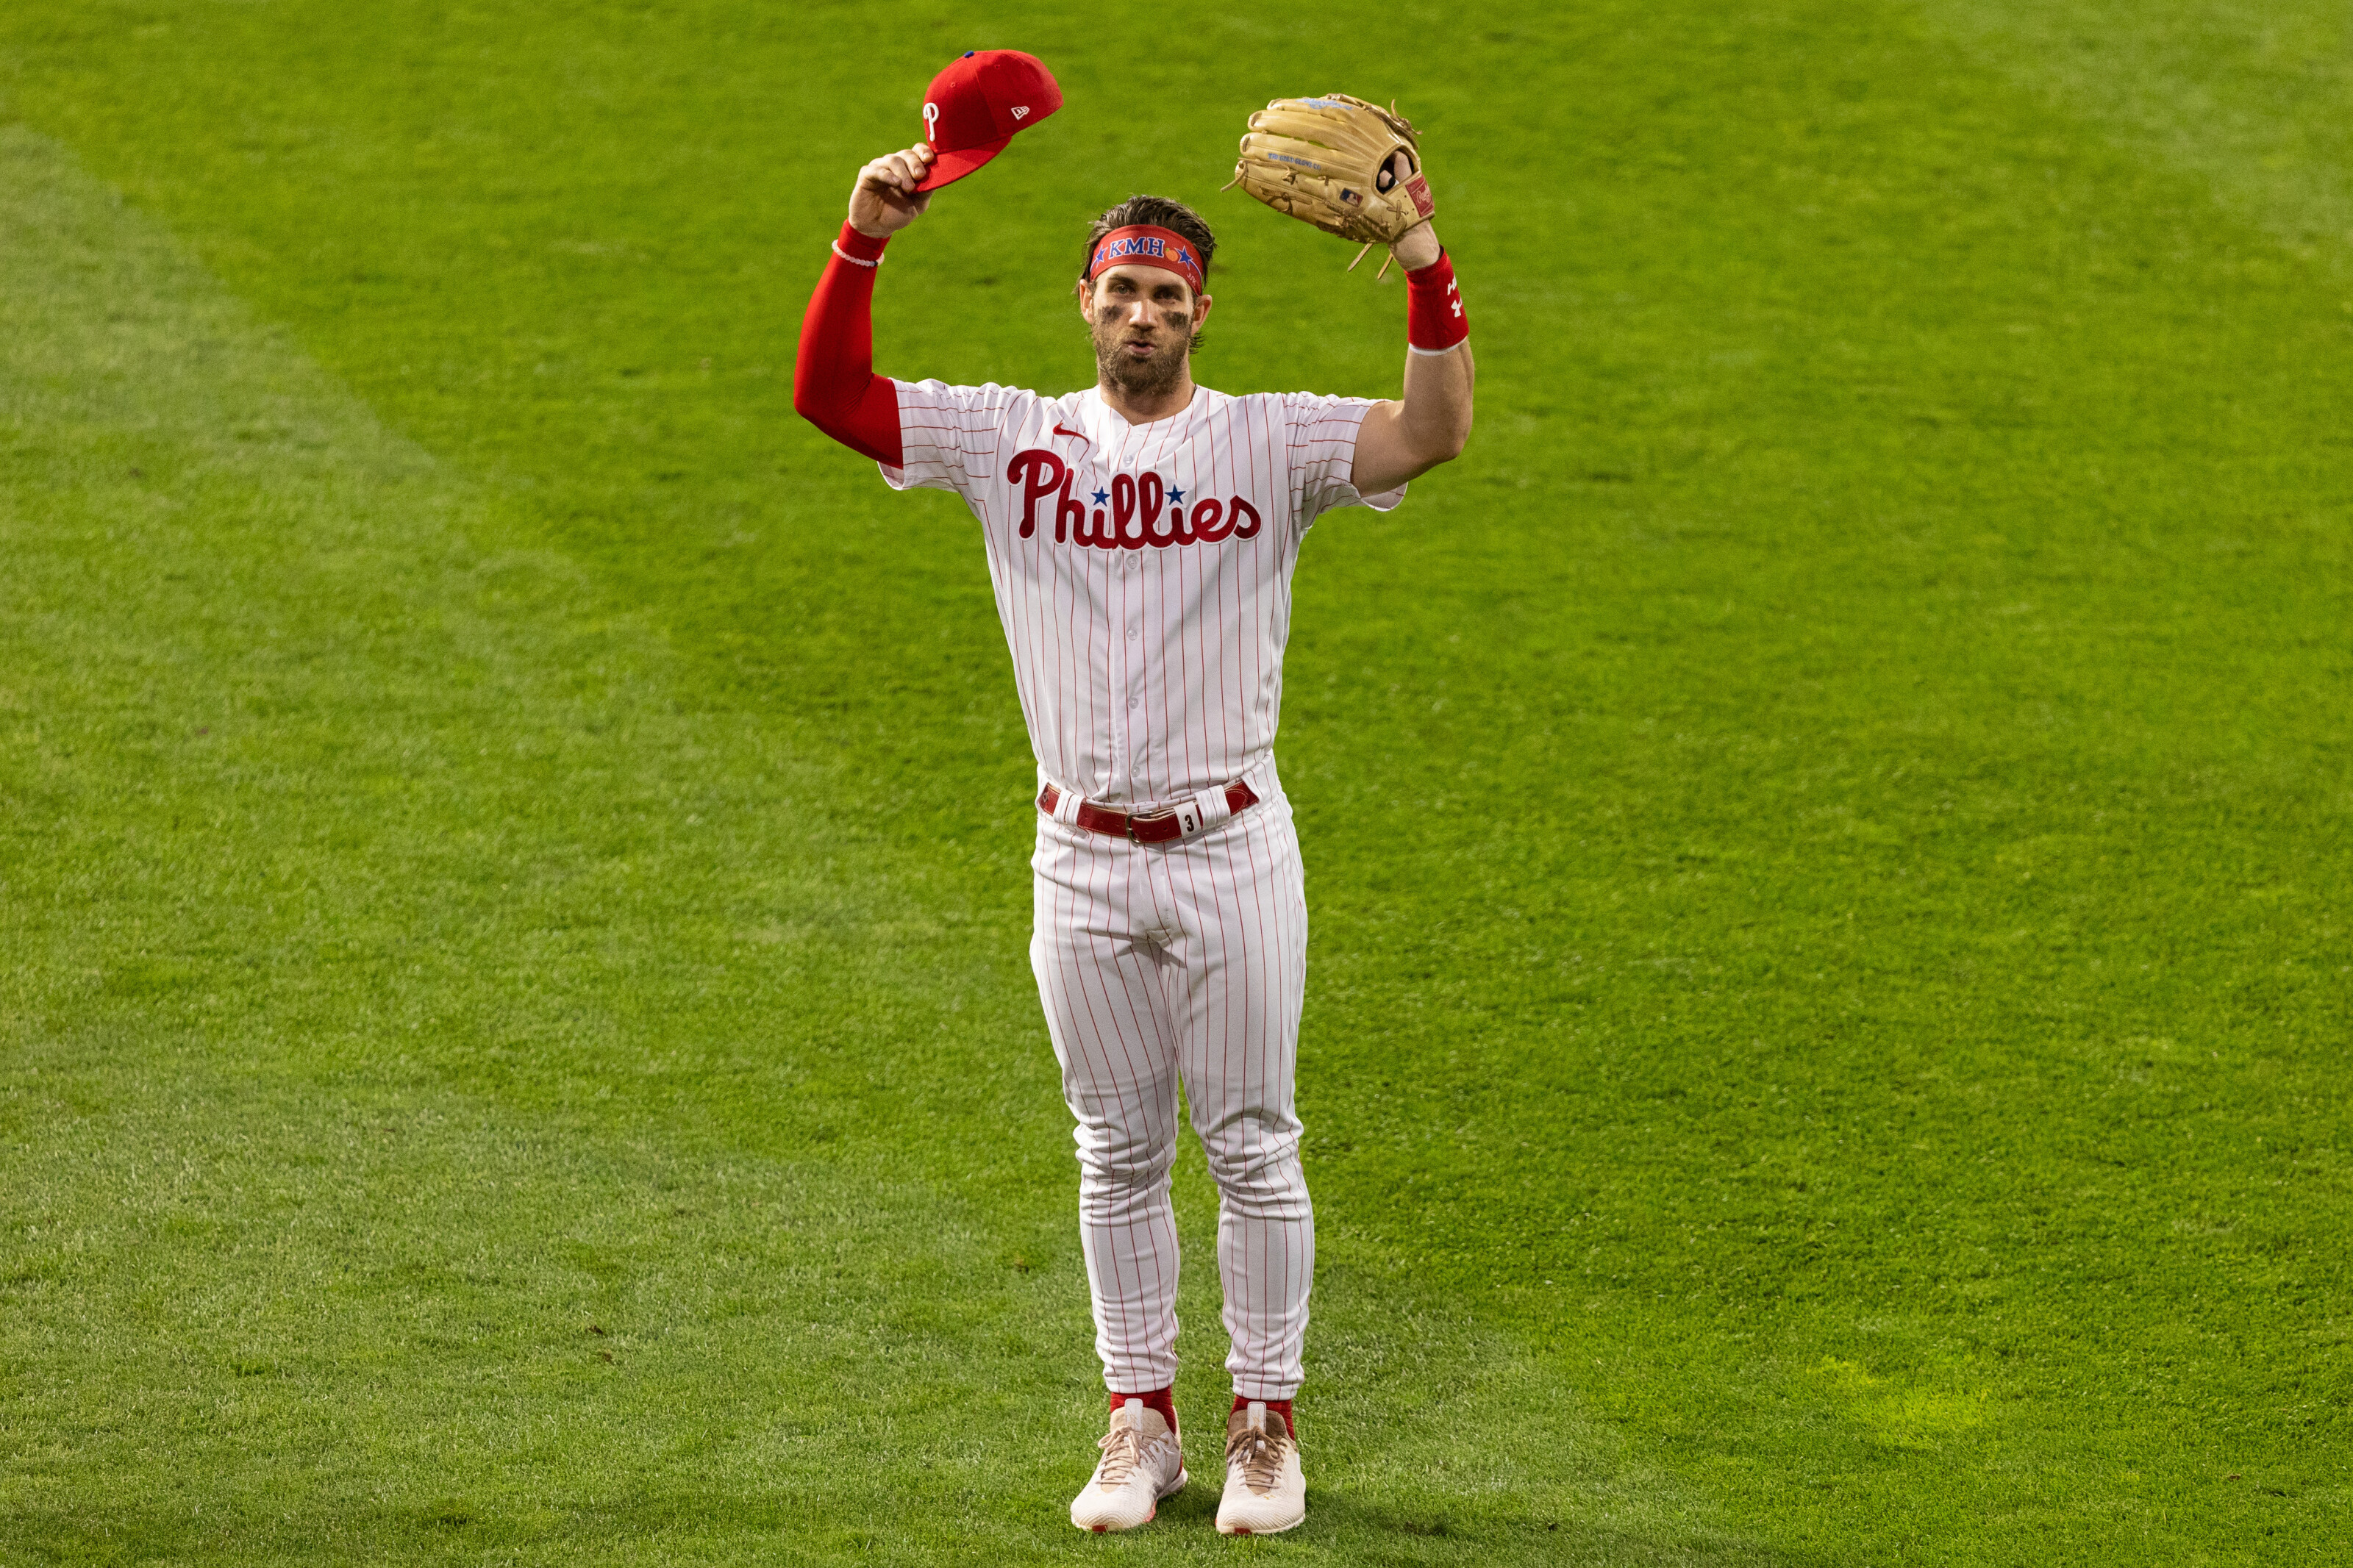 Philadelphia Phillies players who have proven we can trust them